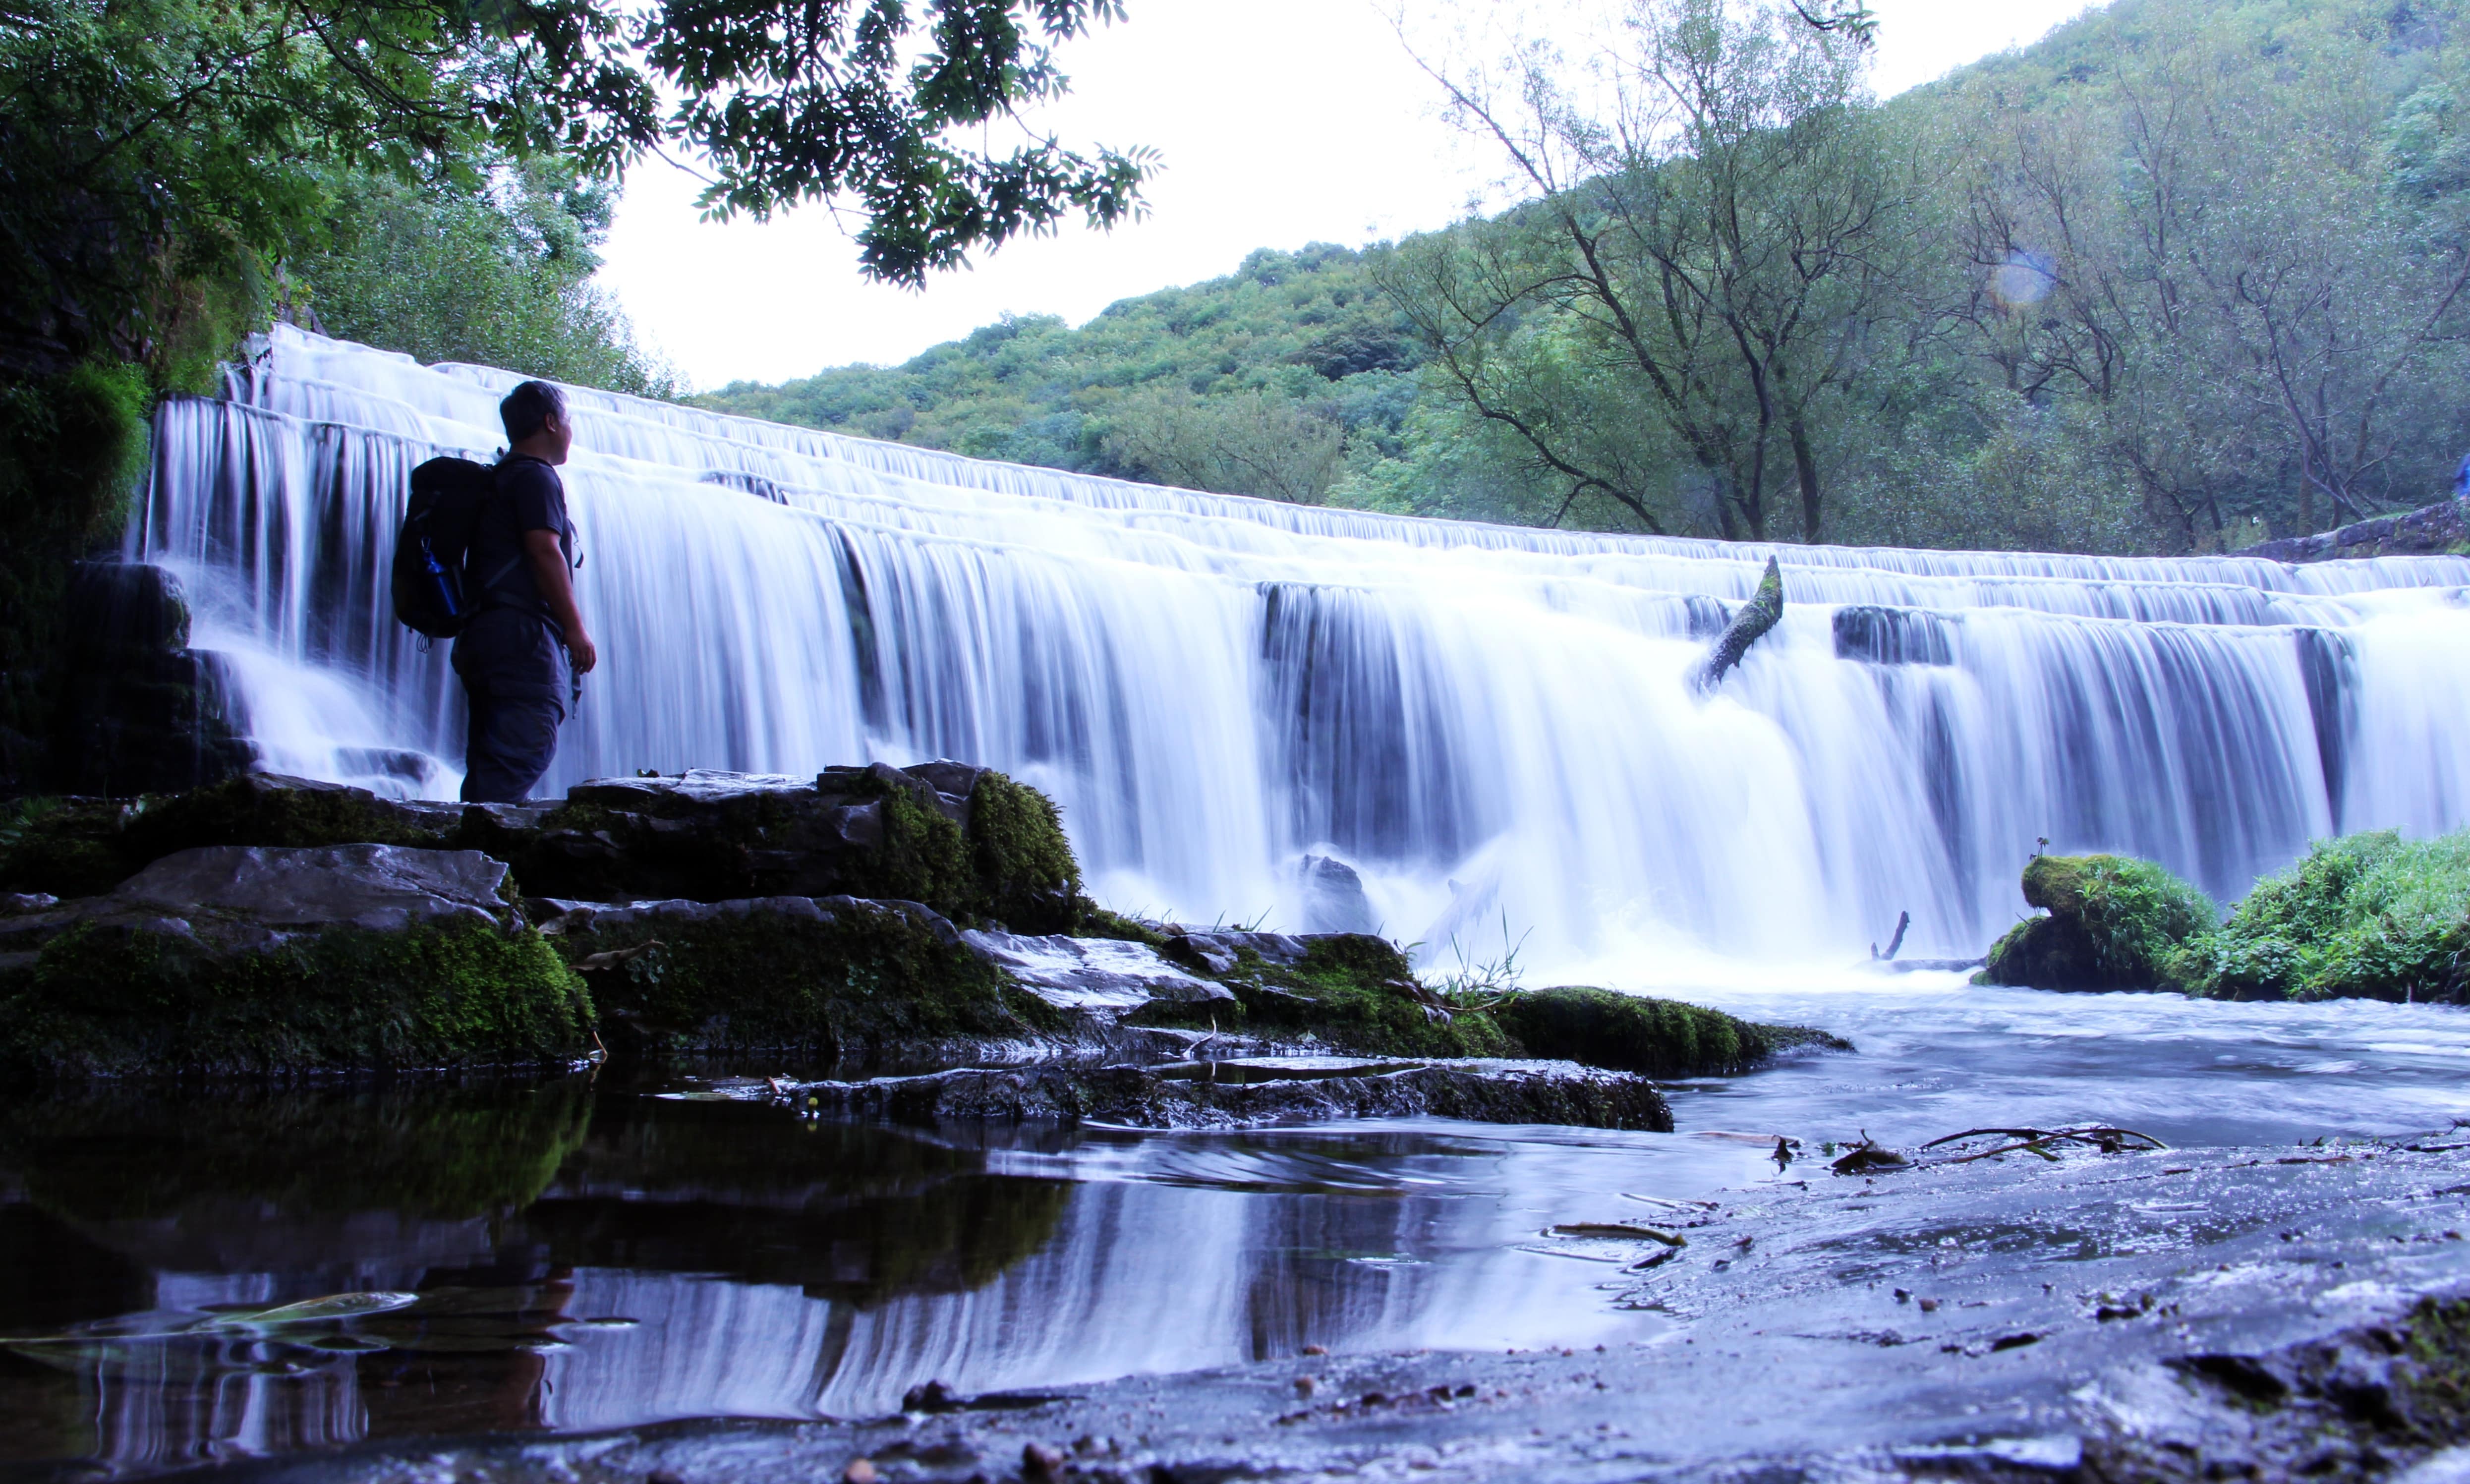 A hiker watches a waterfall in the Peak District